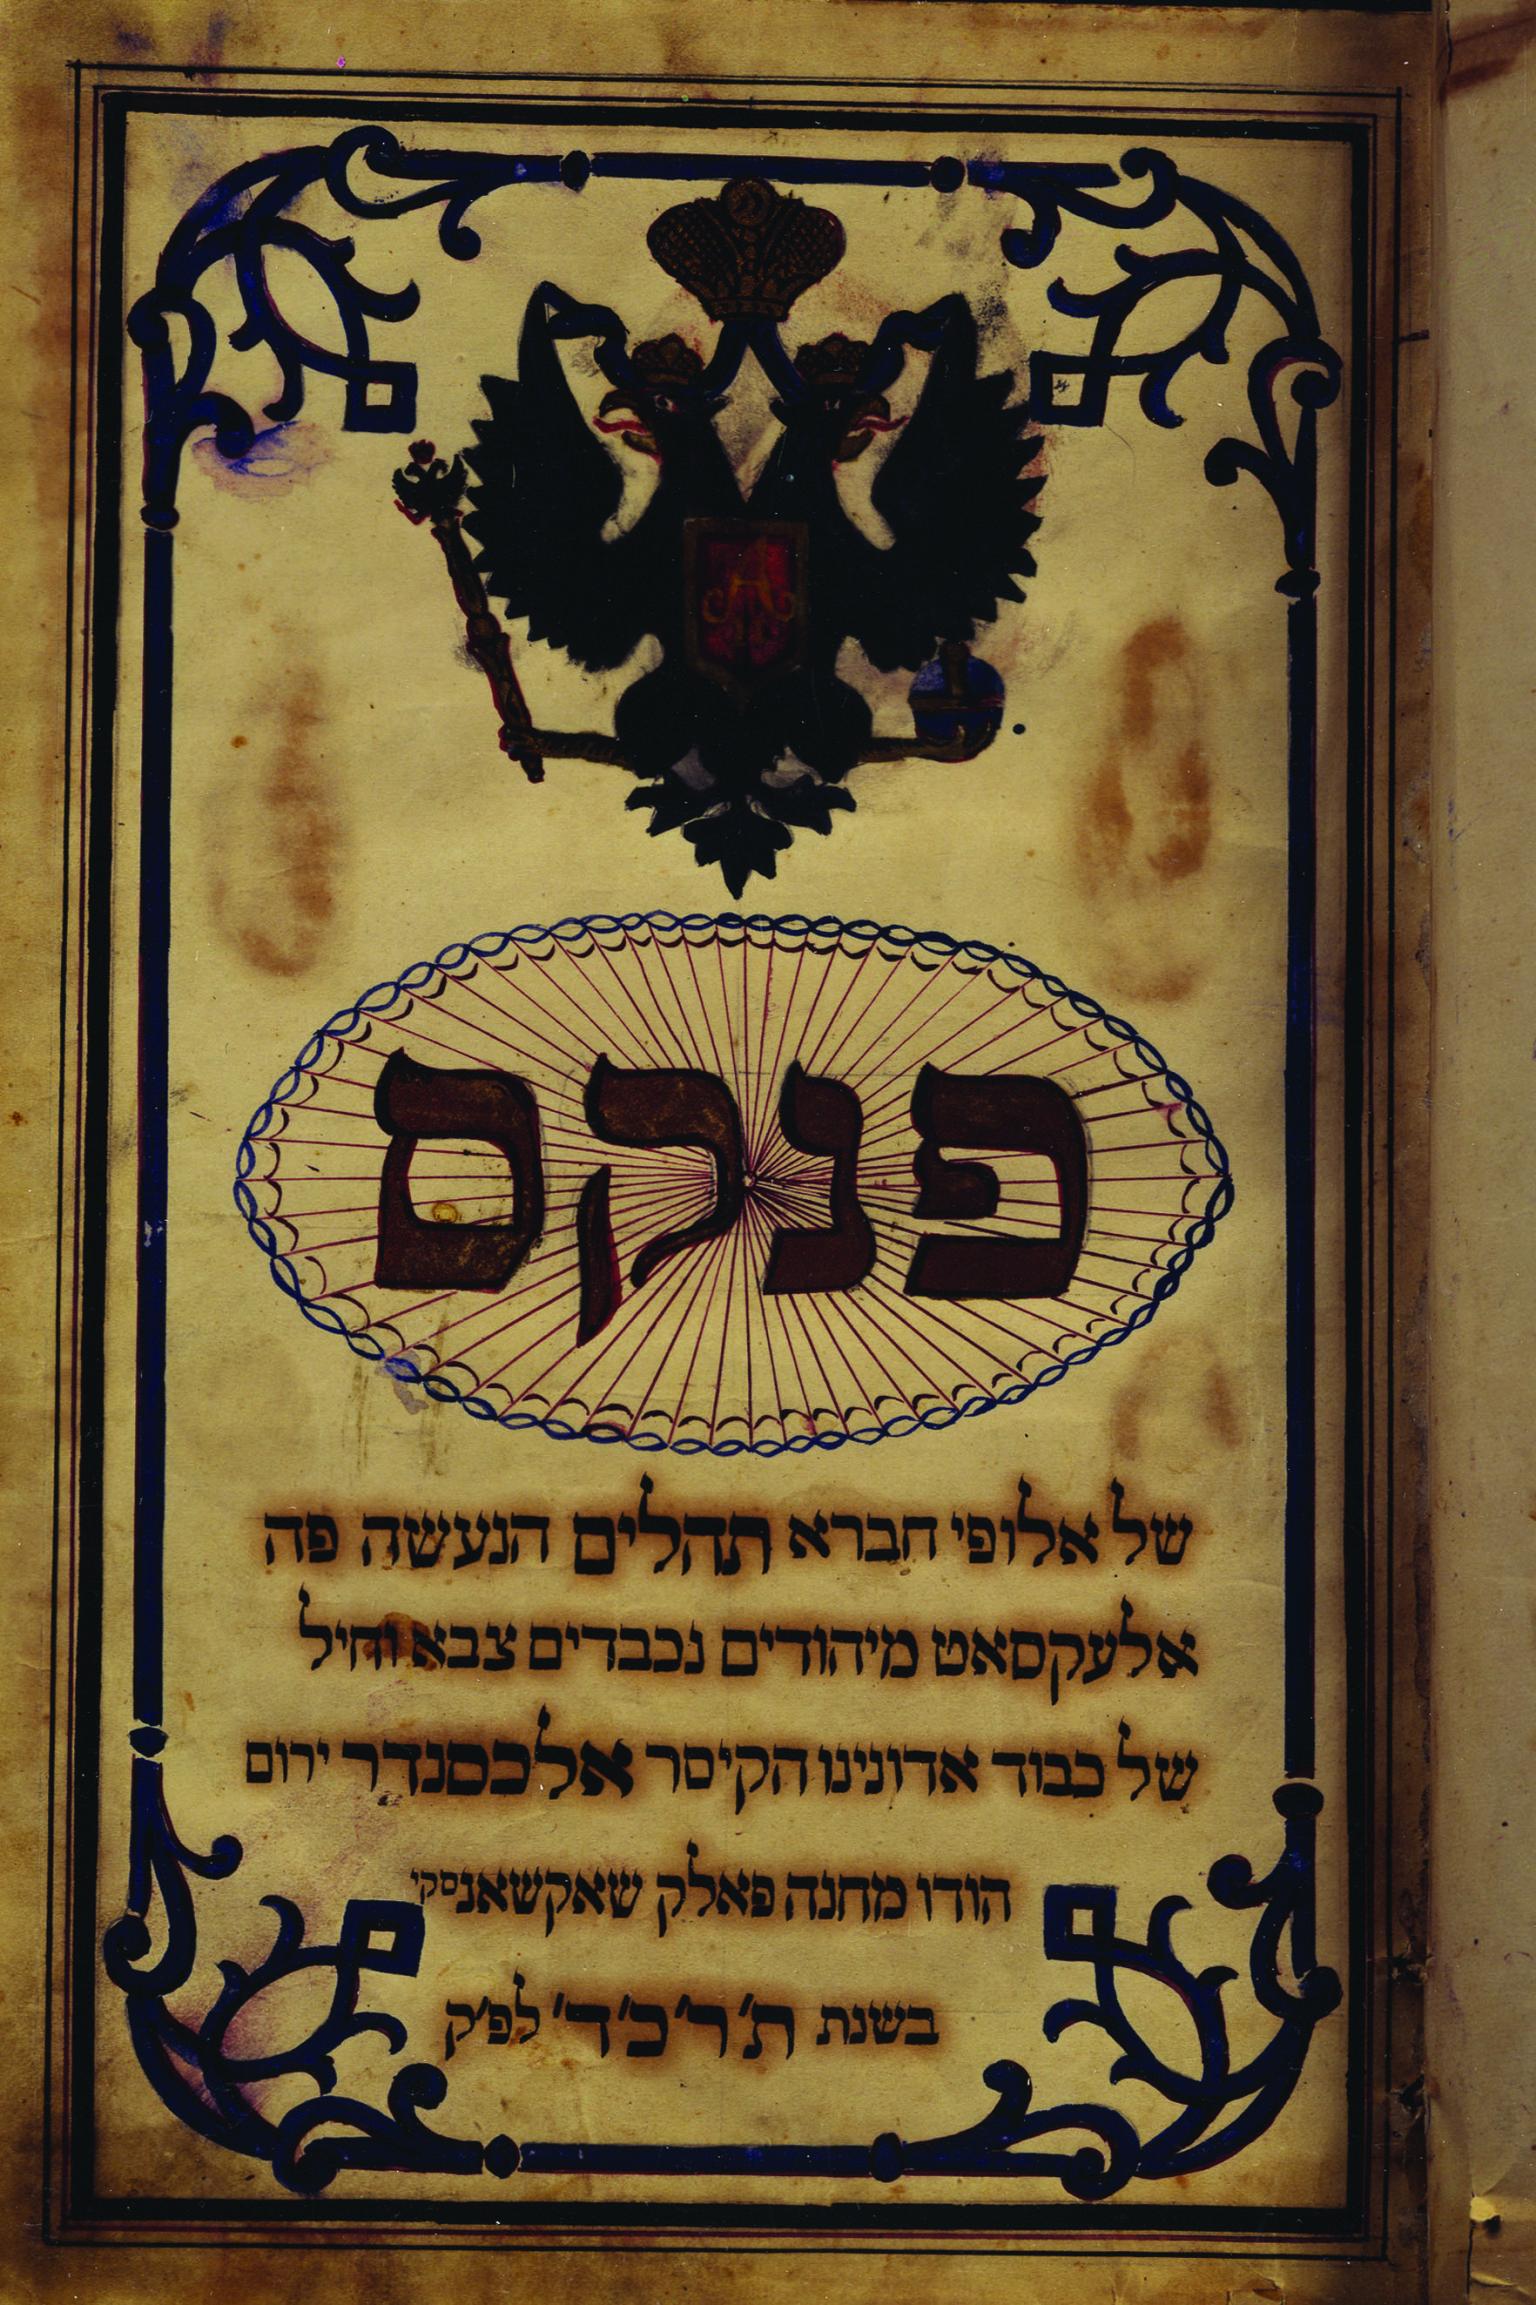 Book page with Hebrew text surrounded by decorative border and animal on top.